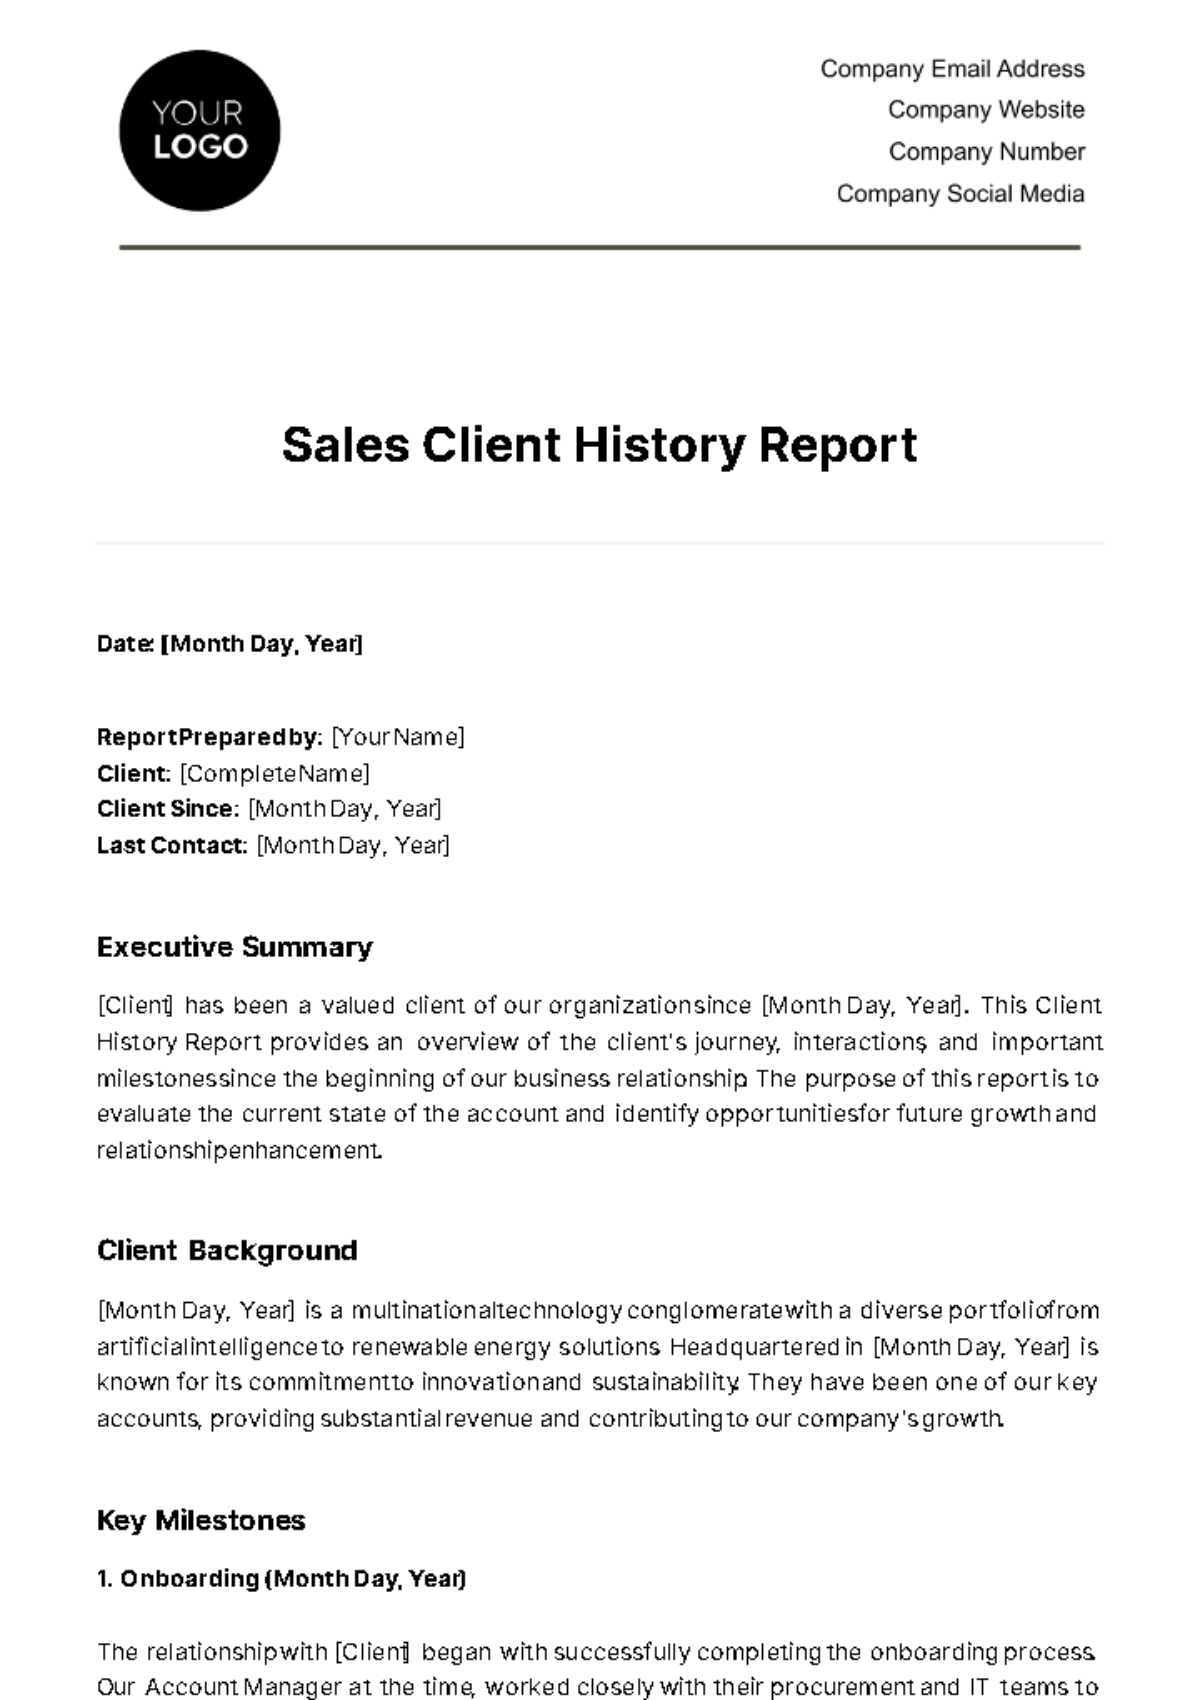 Sales Client History Report Template